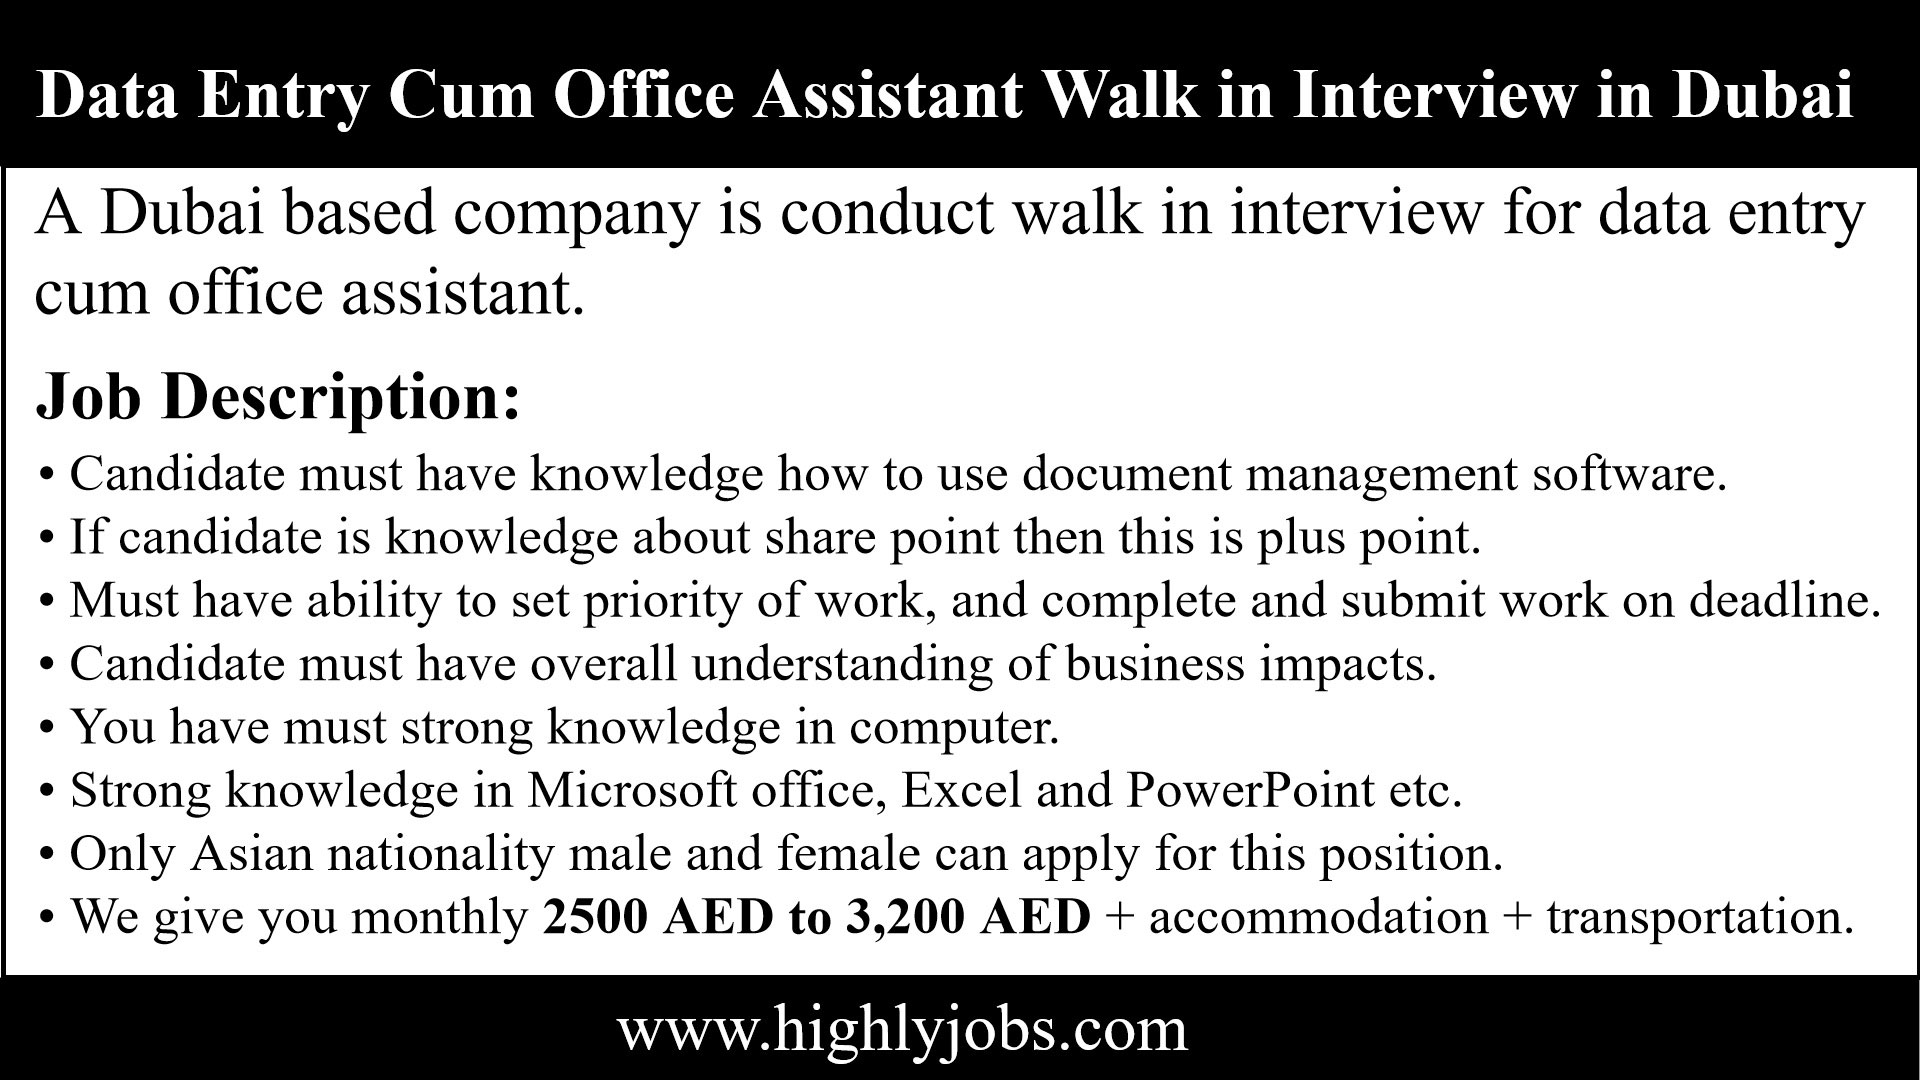 Walk in interview for Data Entry cum Office Assistant Job in Dubai